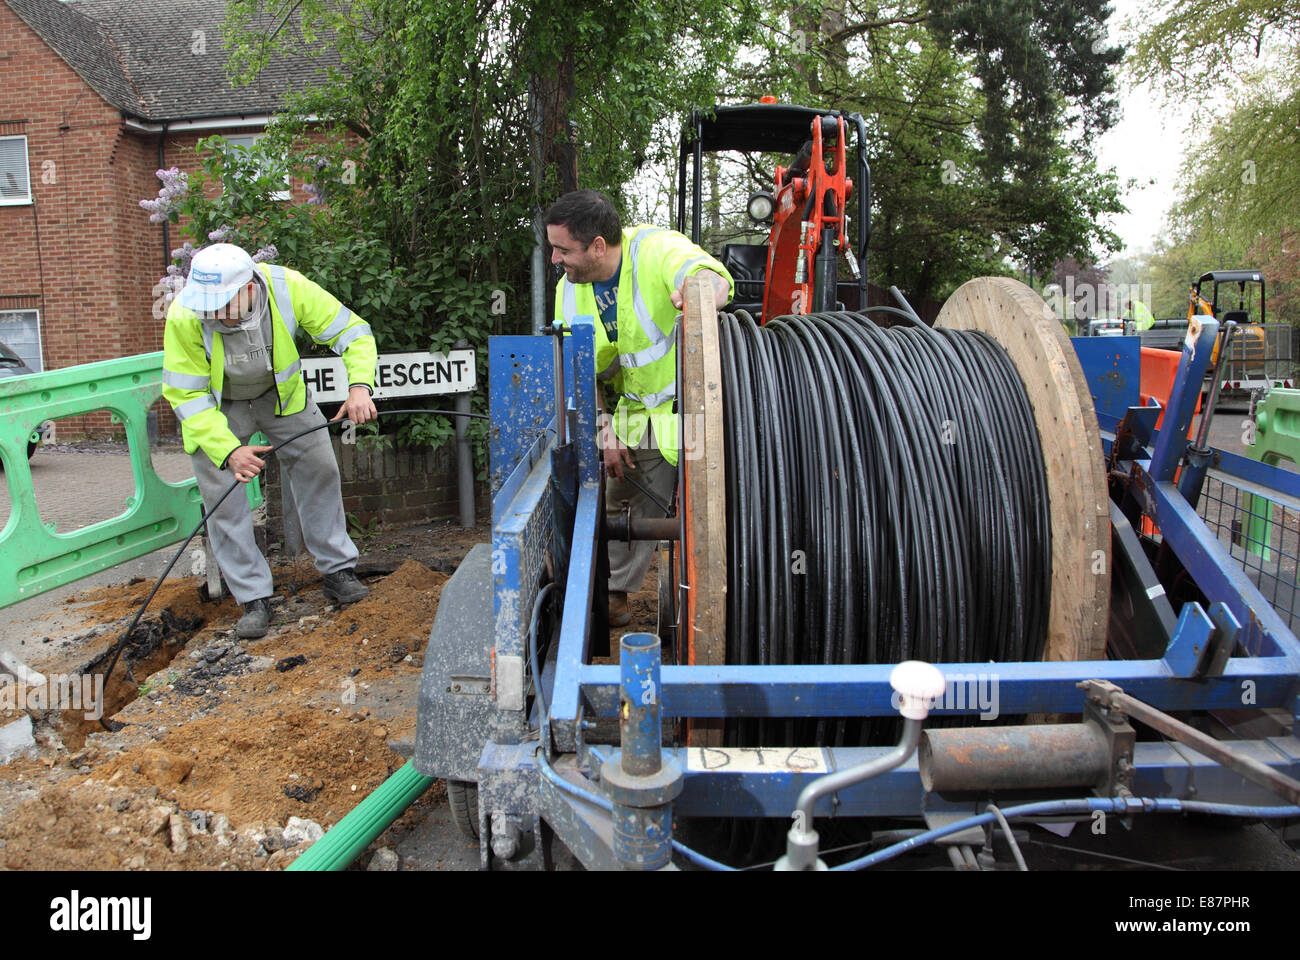 Workmen install new optical cables for high speed broadband in a rural street in southern England Stock Photo